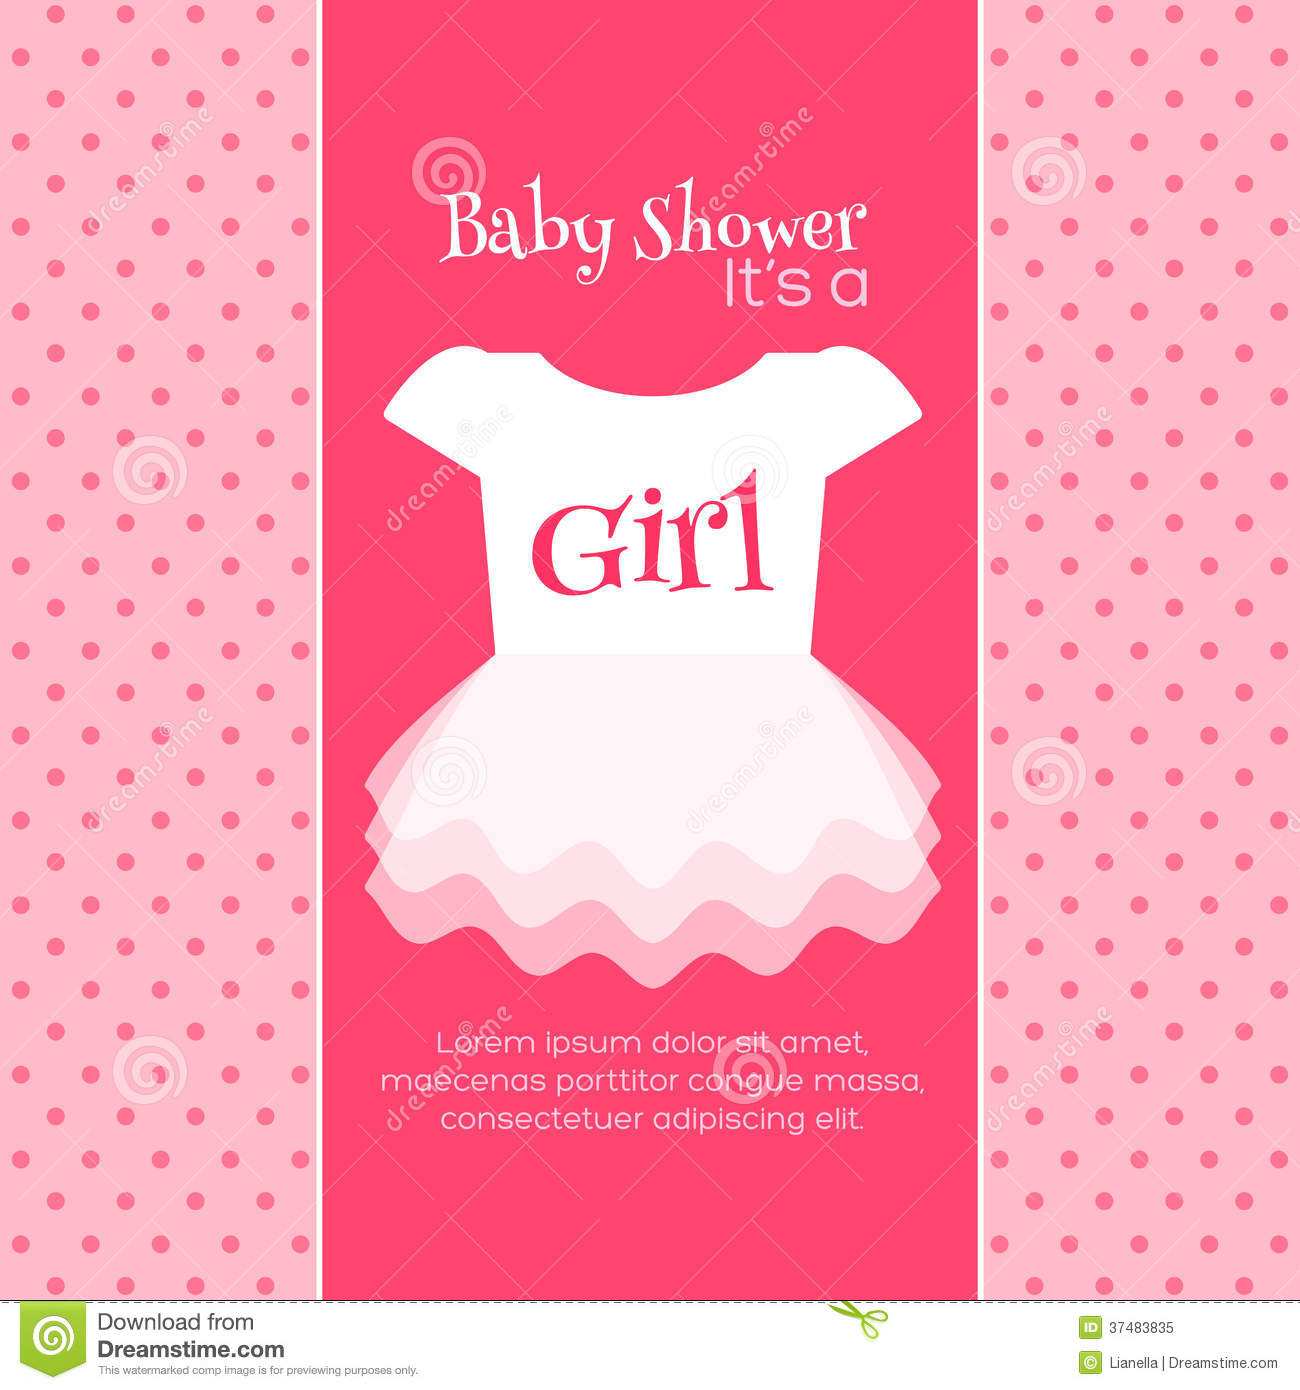 80 Report Baby Shower Invitation Templates Vector Layouts with Baby Shower Invitation Templates Vector